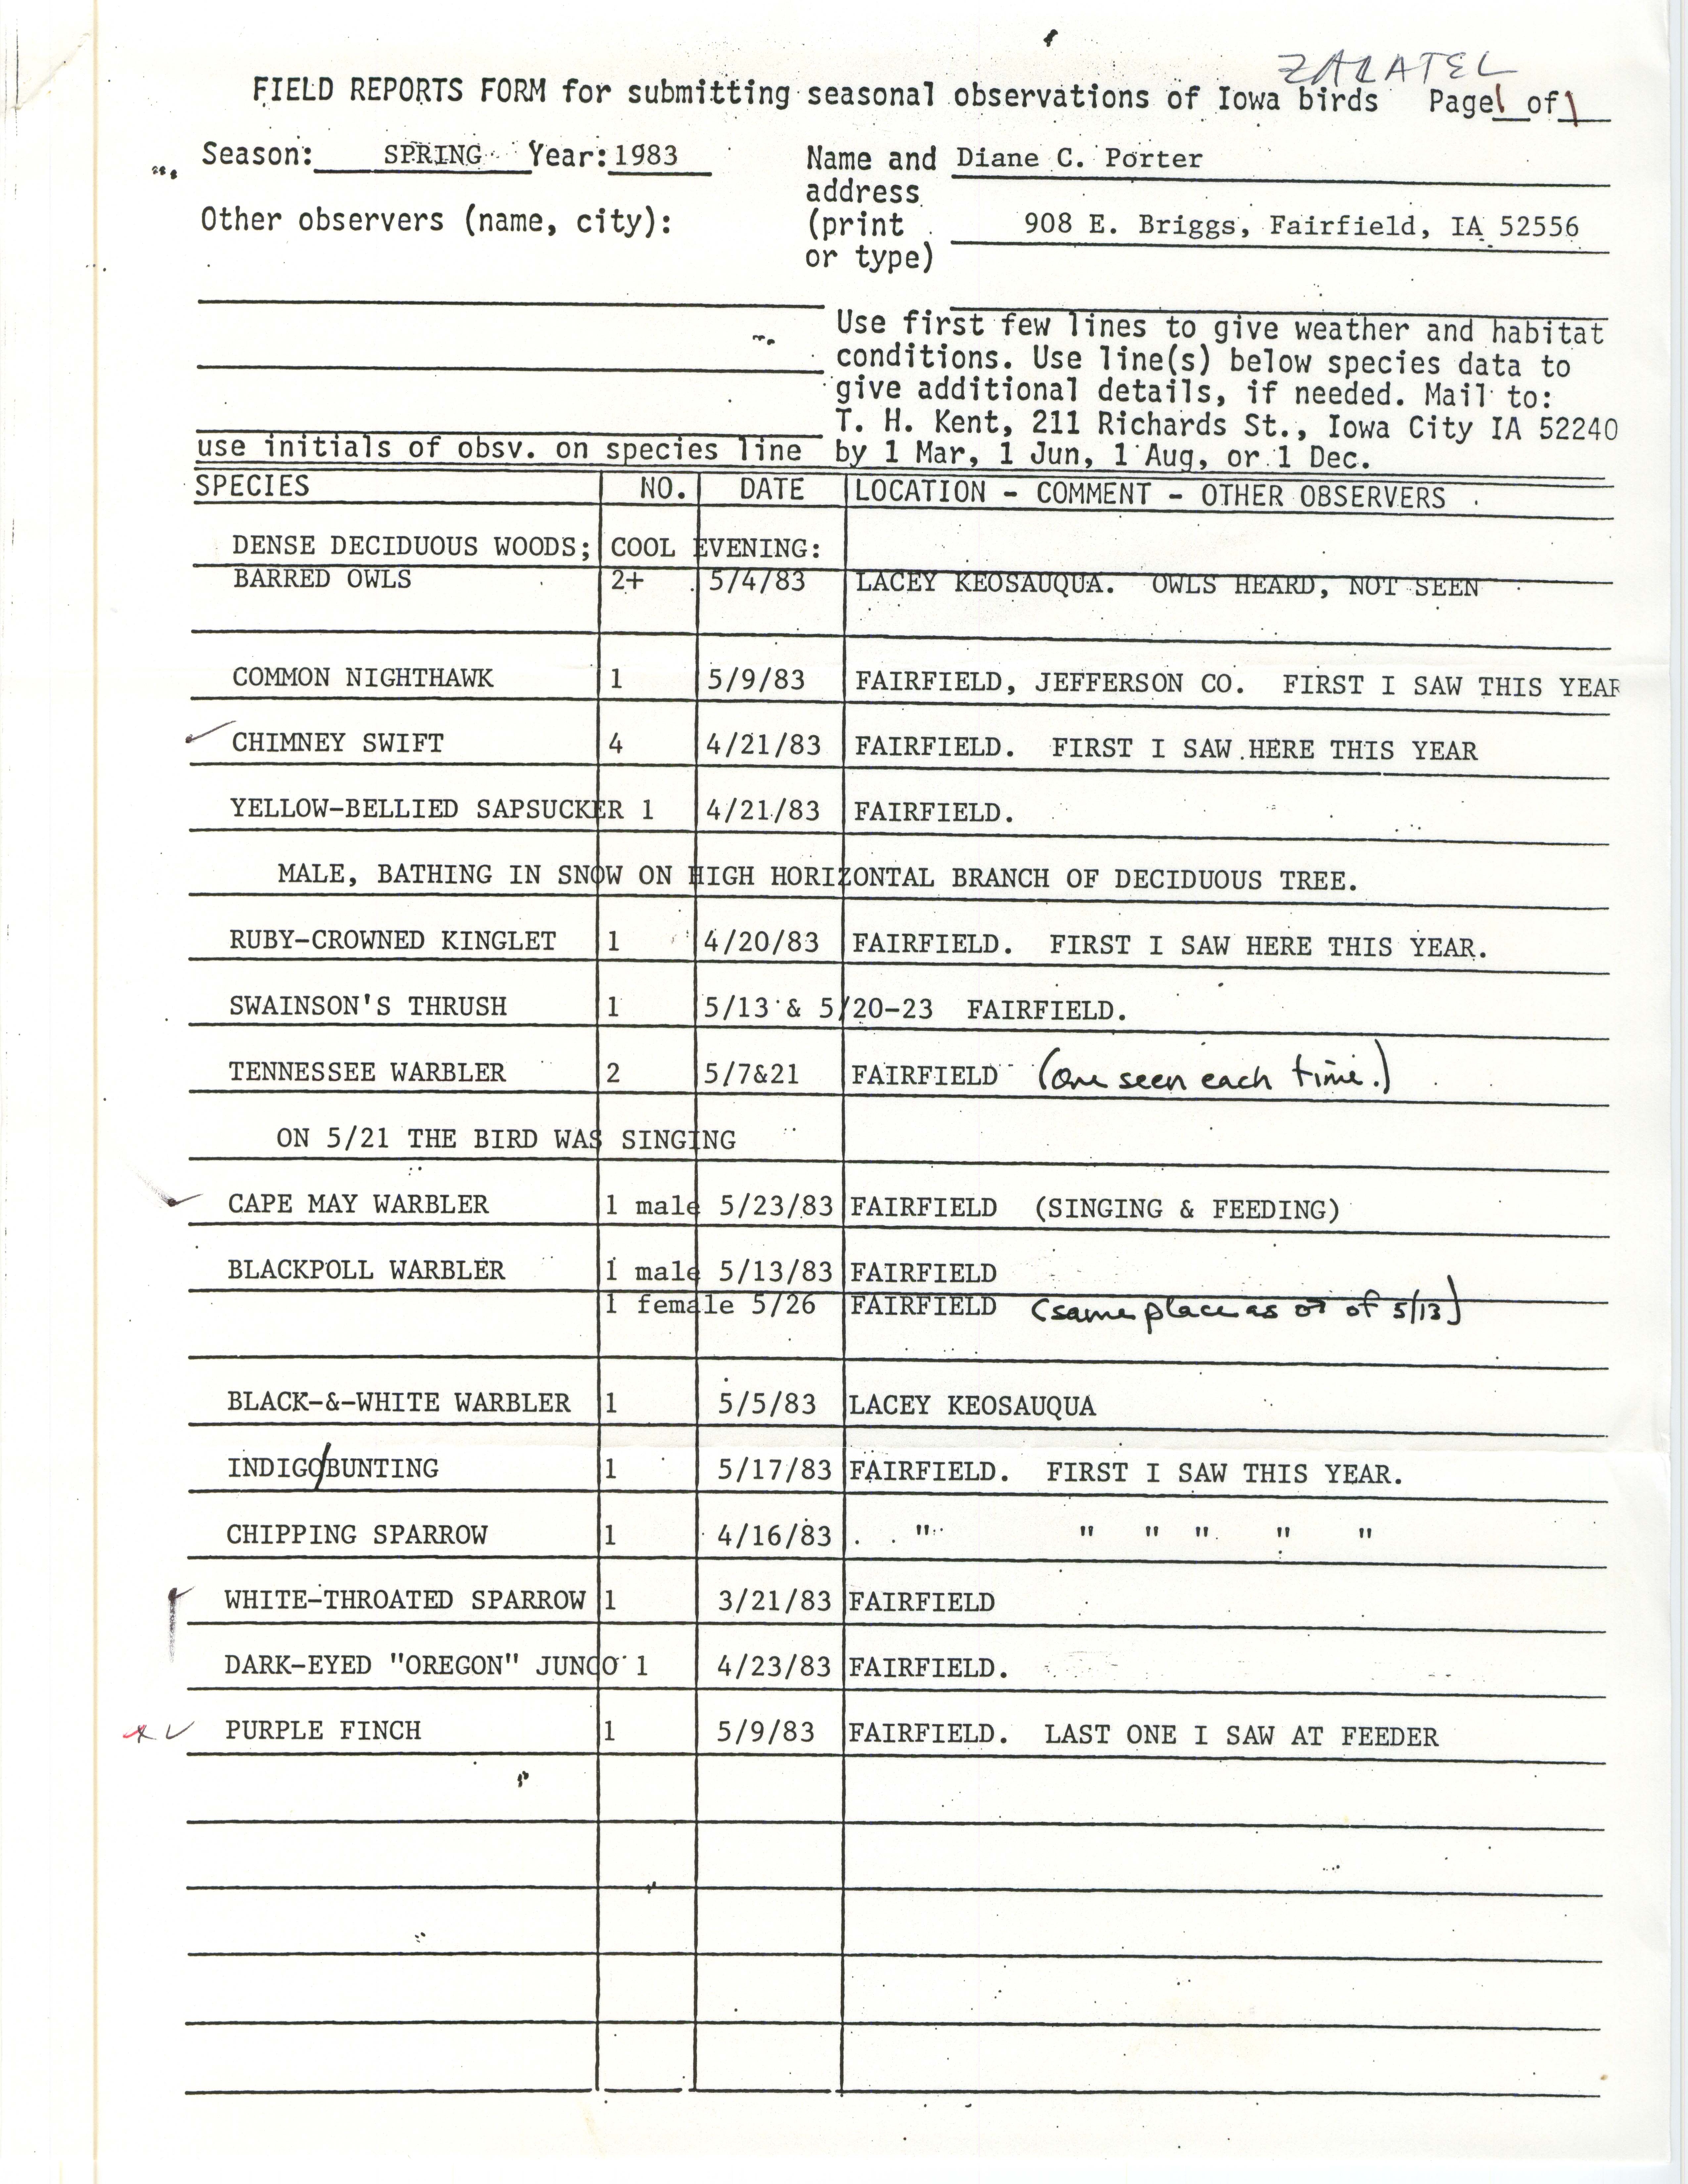 Field reports form for submitting seasonal observations of Iowa birds with verifying documentation, Diane C. Porter, spring 1983